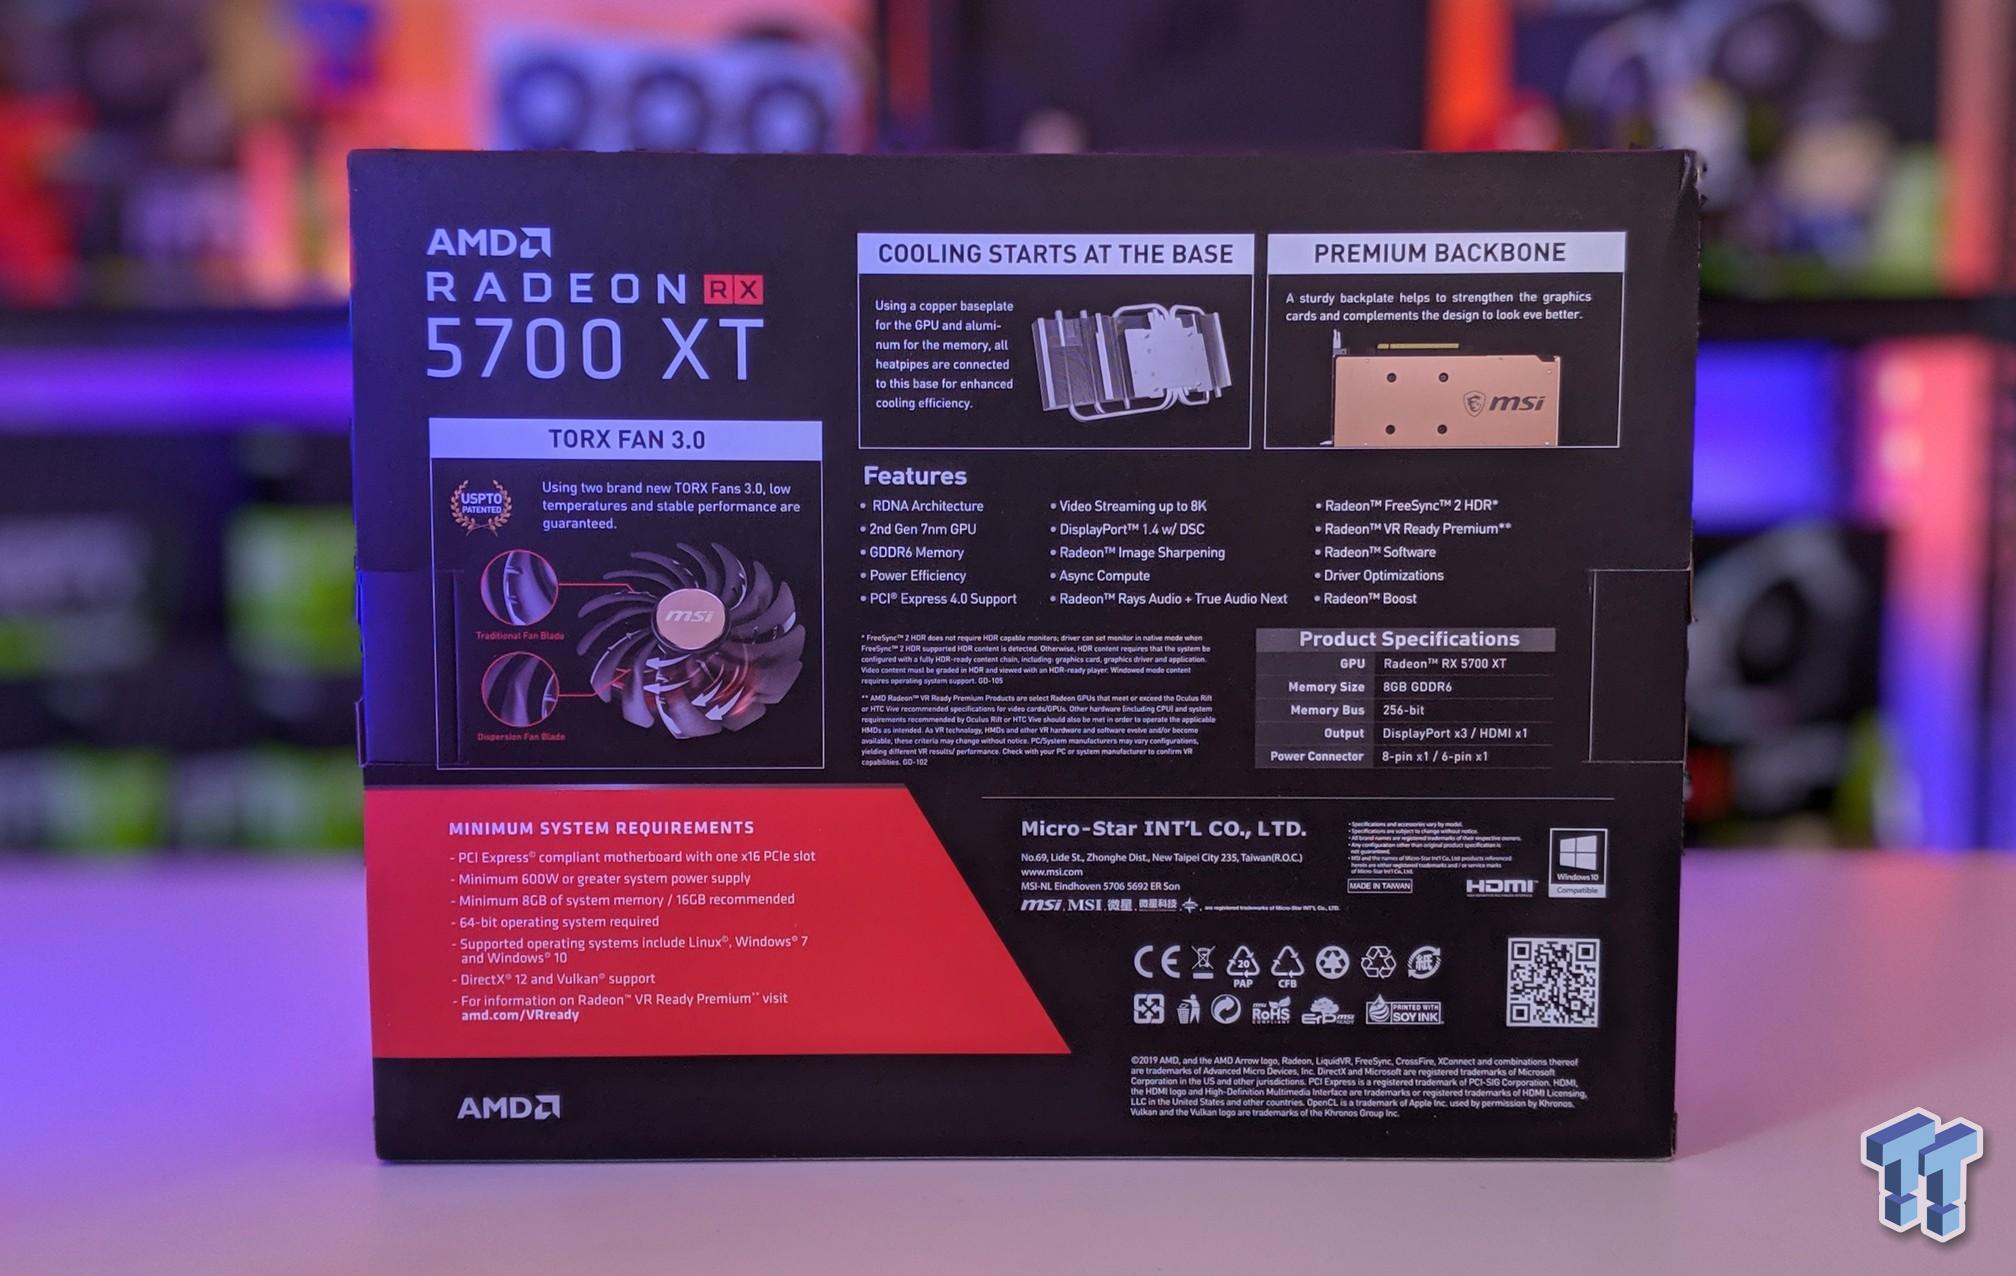 Amd Hid The True Power Of The Rx 5700